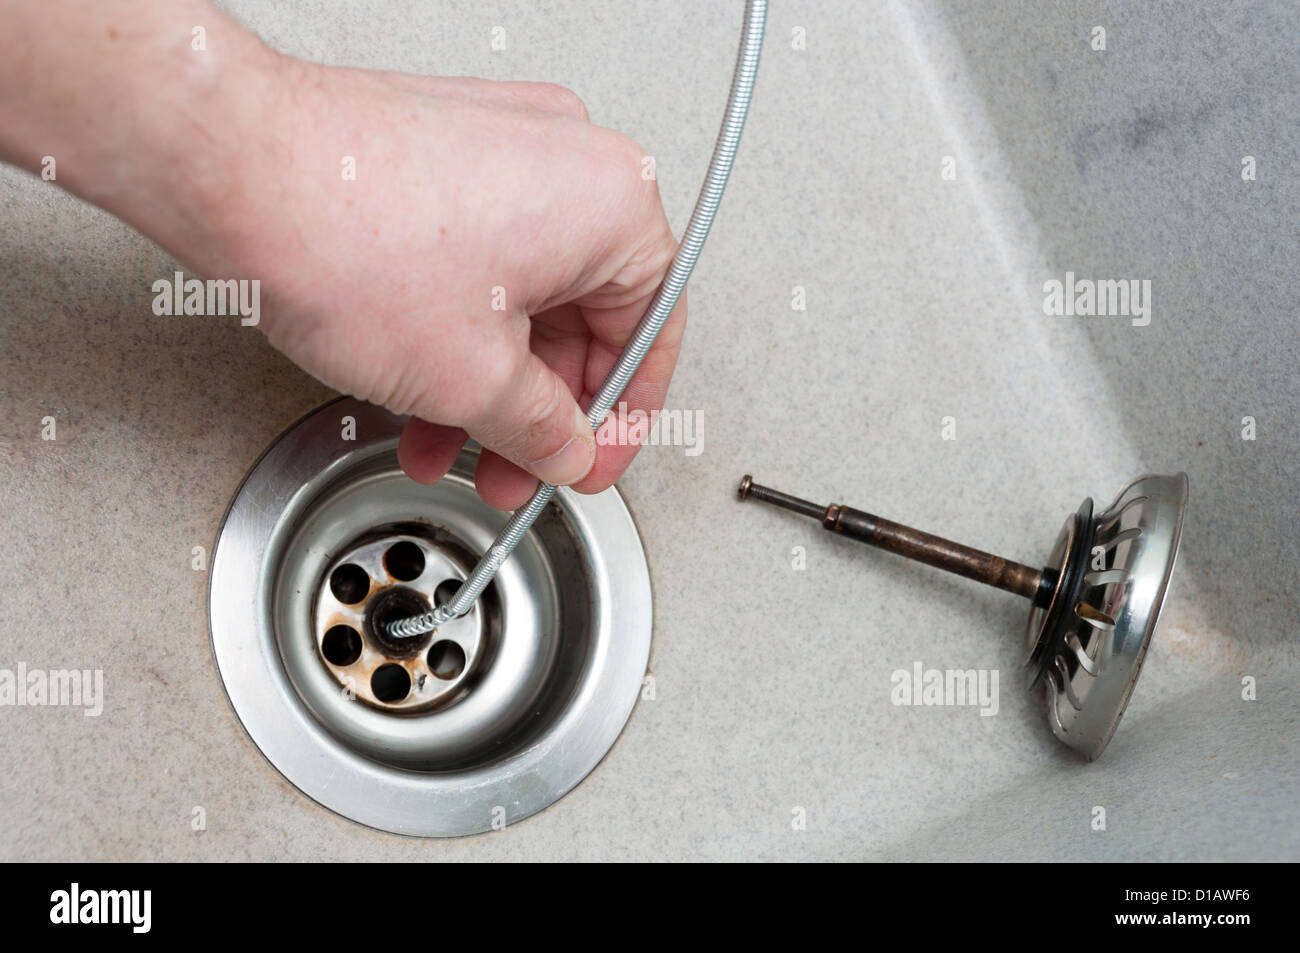 https://c8.alamy.com/comp/D1AWF6/drain-python-tool-for-cleaning-and-unblocking-sink-plughole-drains-D1AWF6.jpg